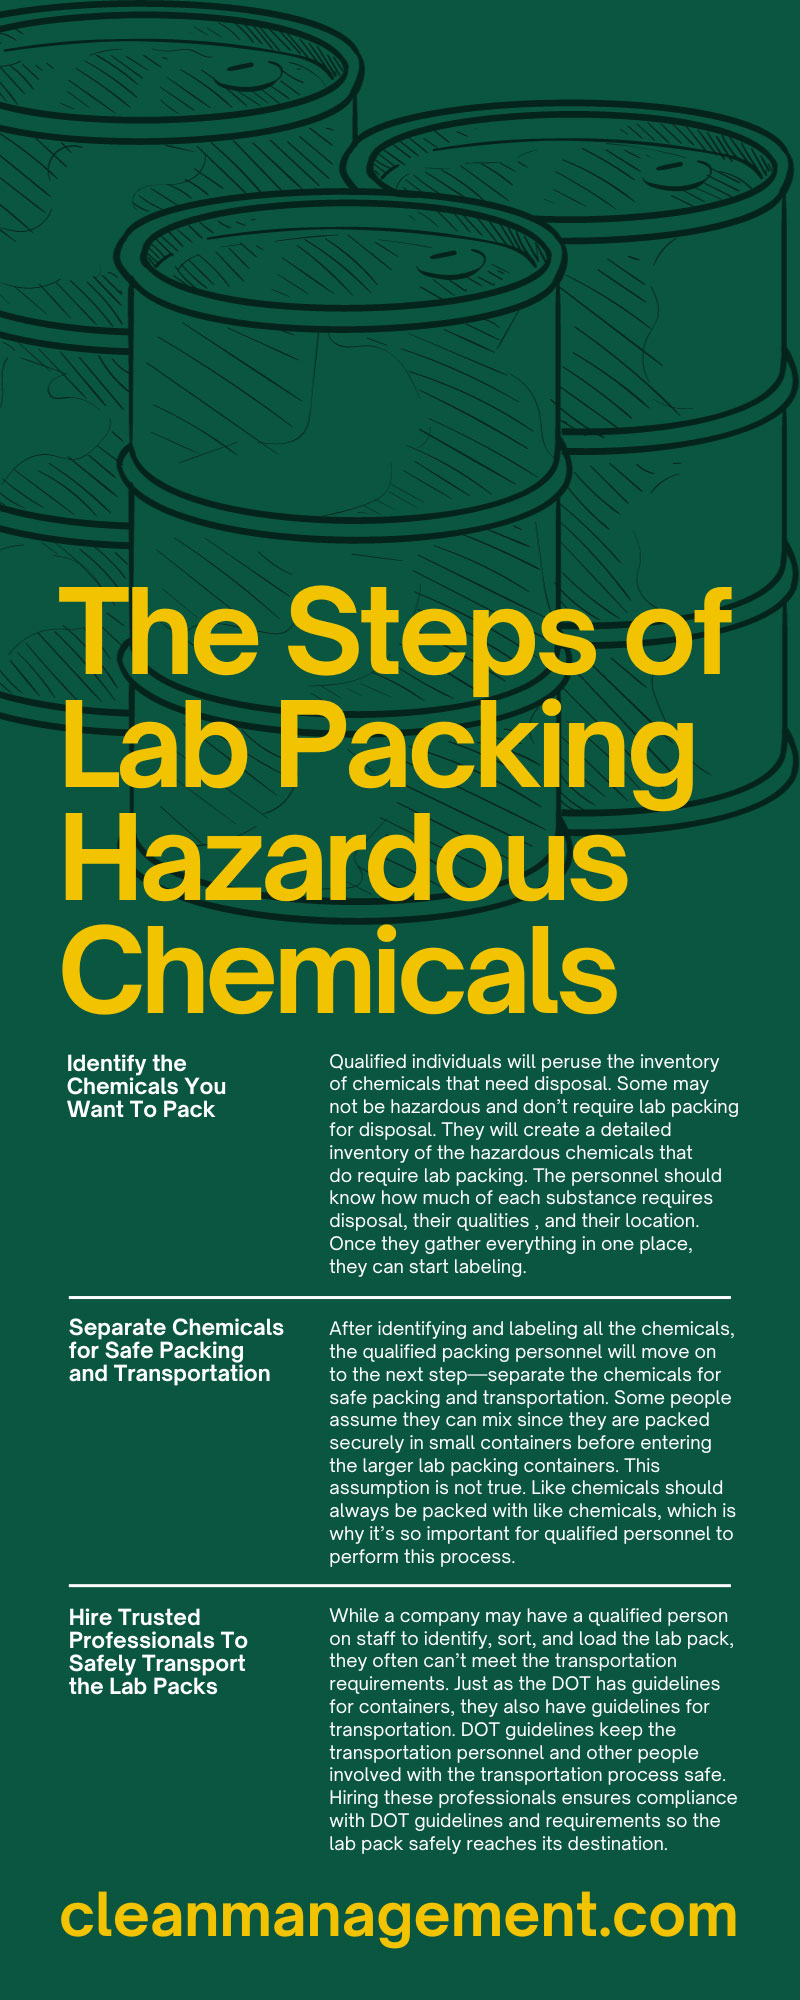 The 5 Steps of Lab Packing Hazardous Chemicals